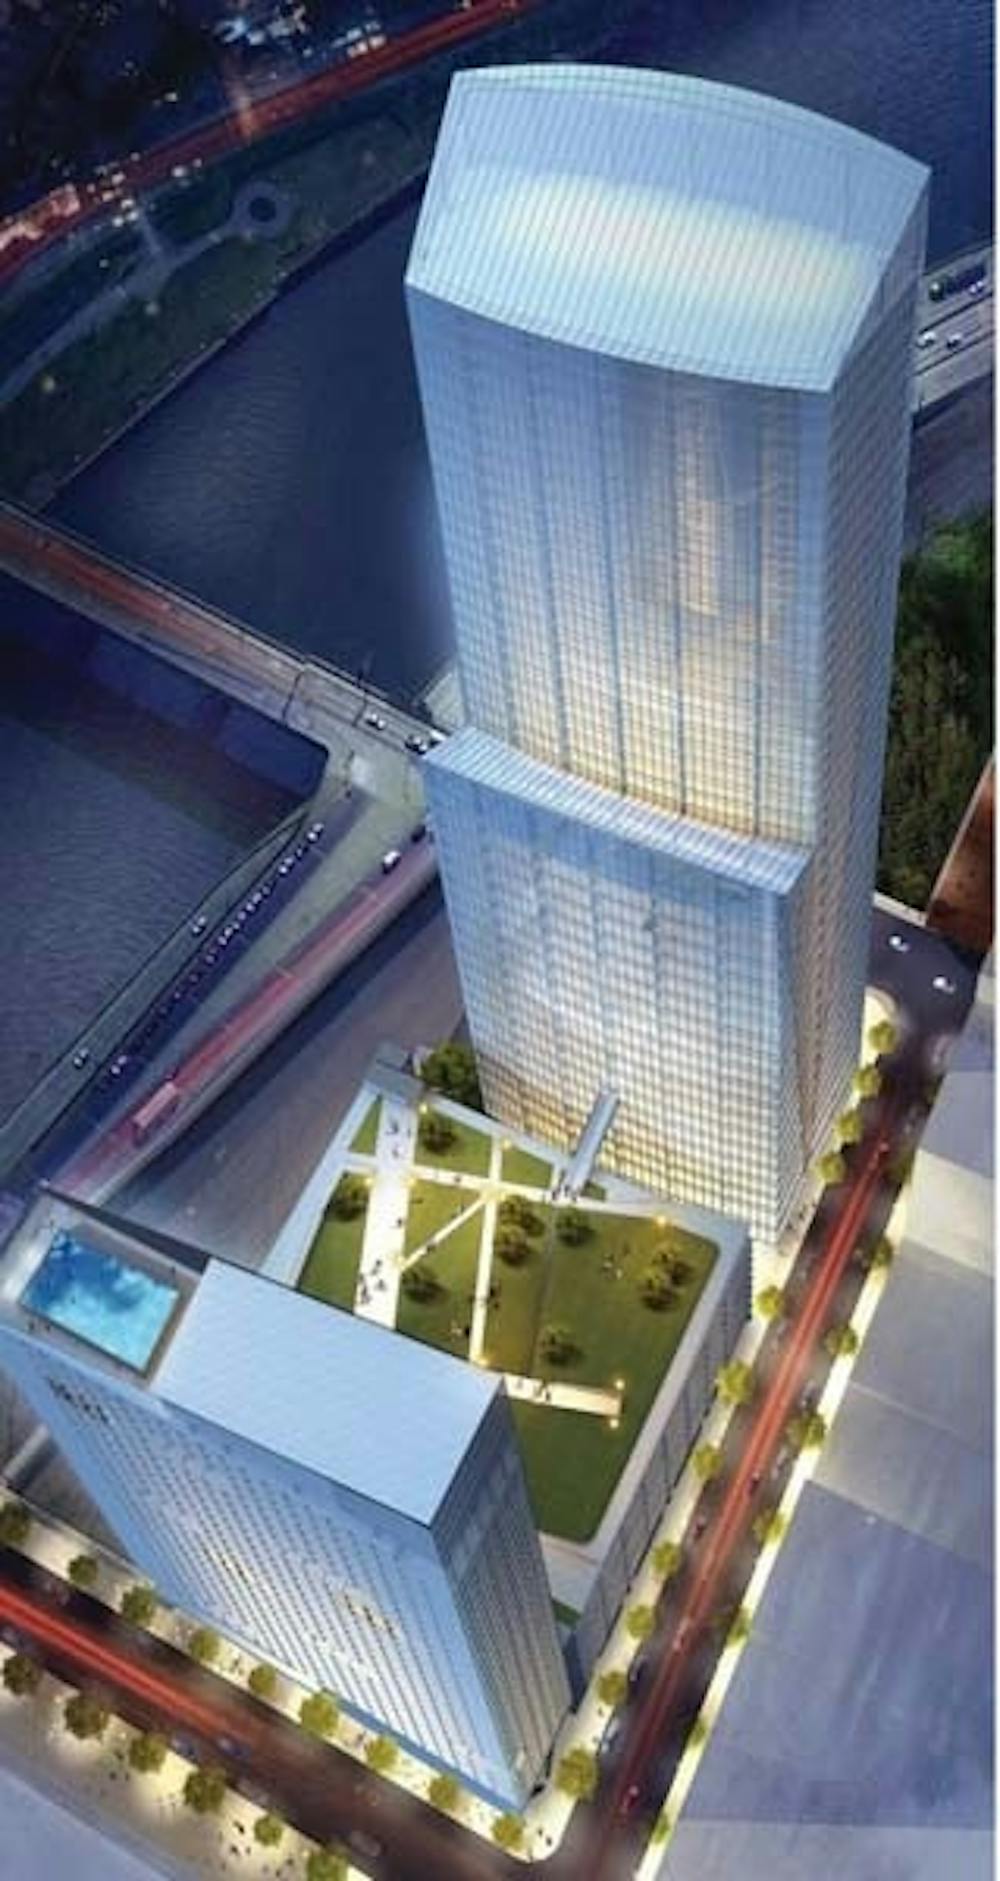 	Penn will lease 100,000 square feet of the FMC Tower at the Cira Centre South, a 47-story building on 30th and Walnut streets that will open in 2016.